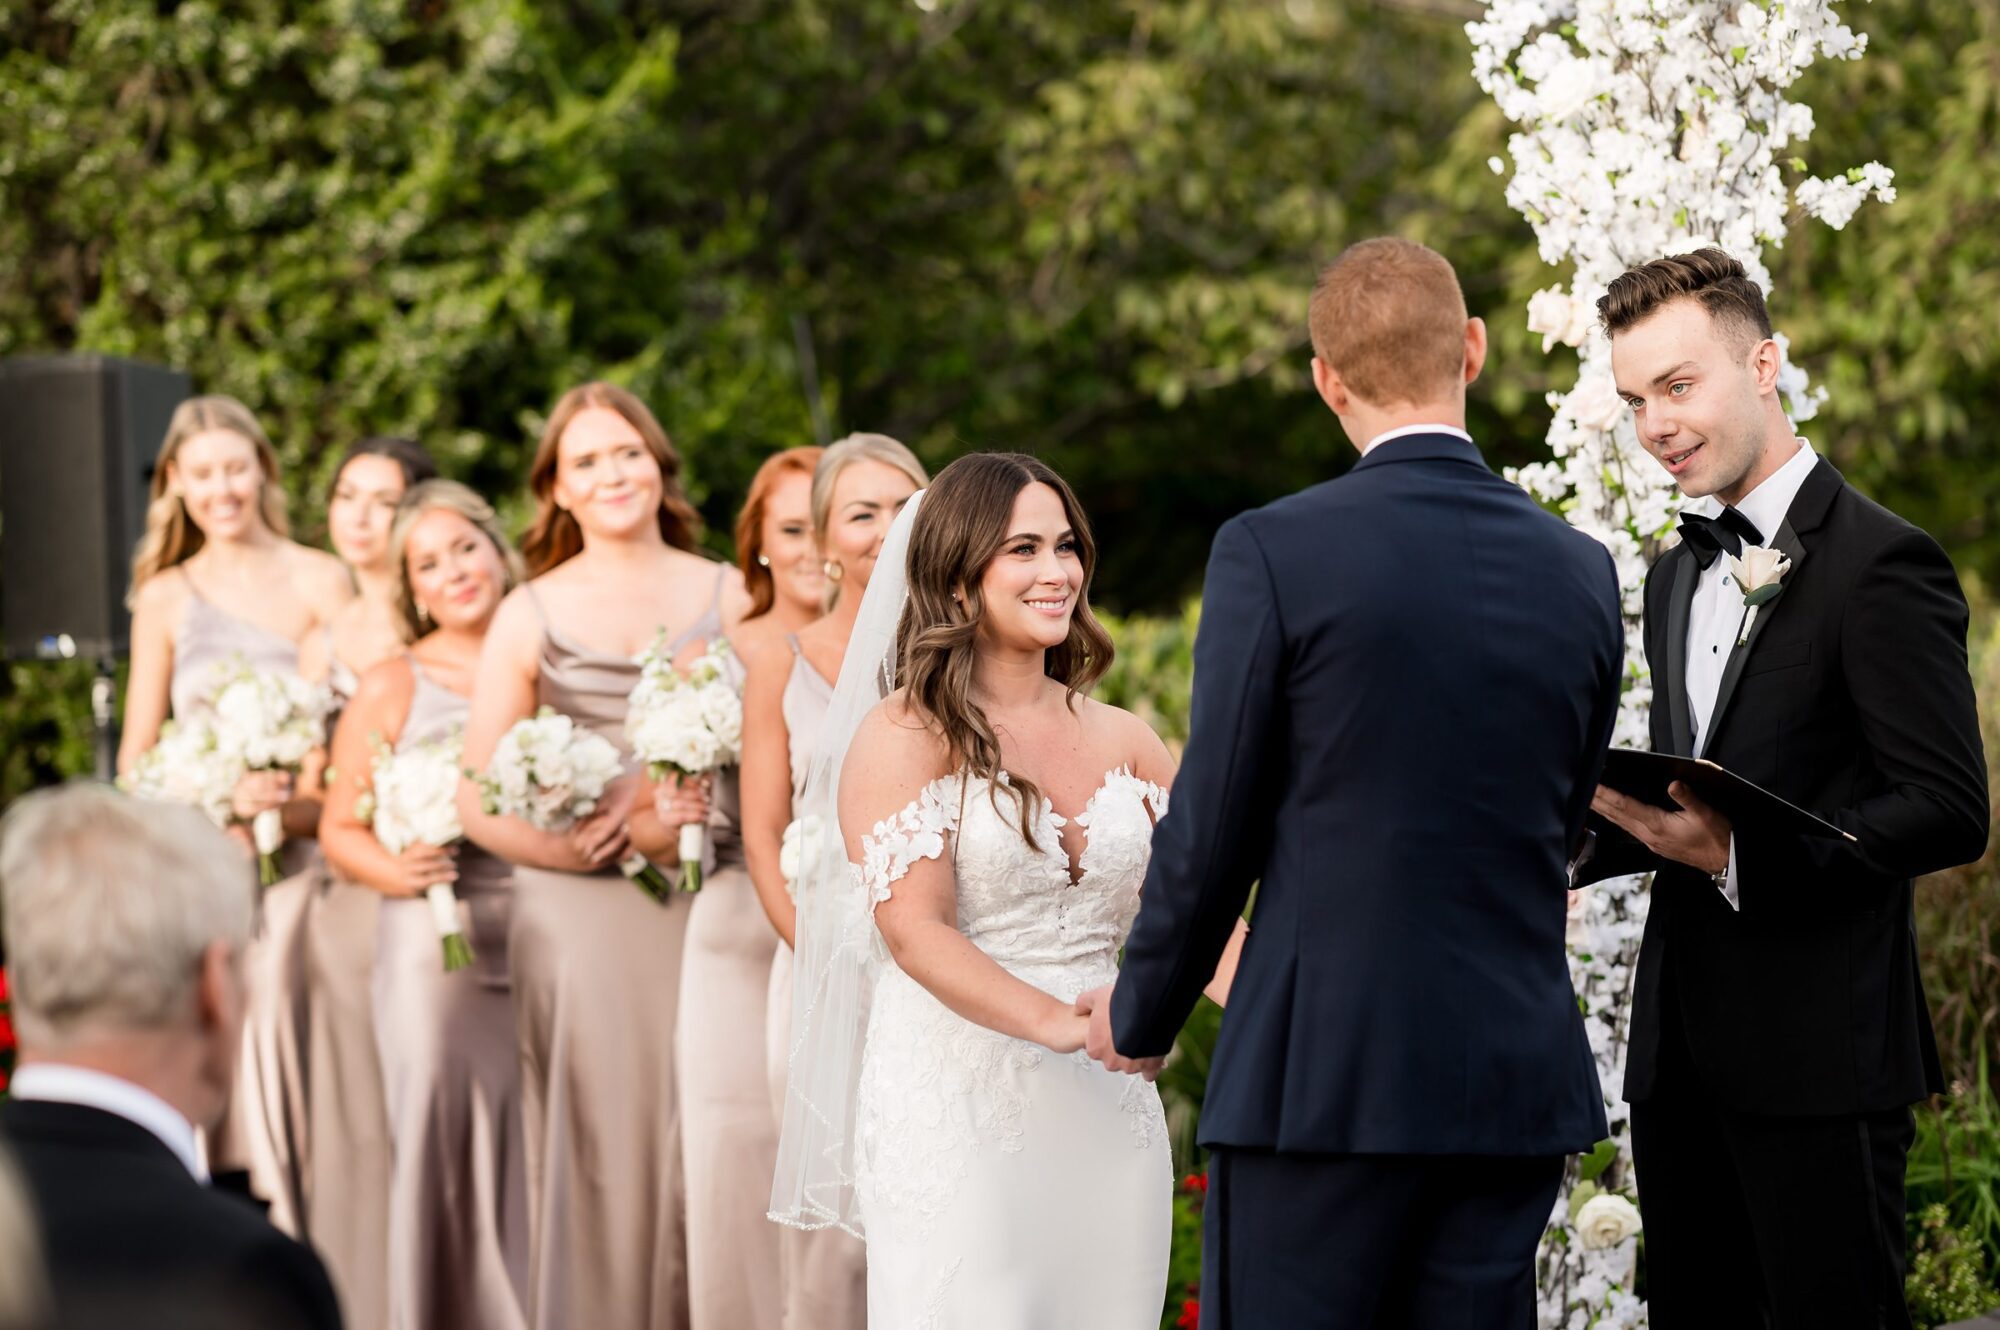 A bride and groom exchange vows during their outdoor wedding ceremony.